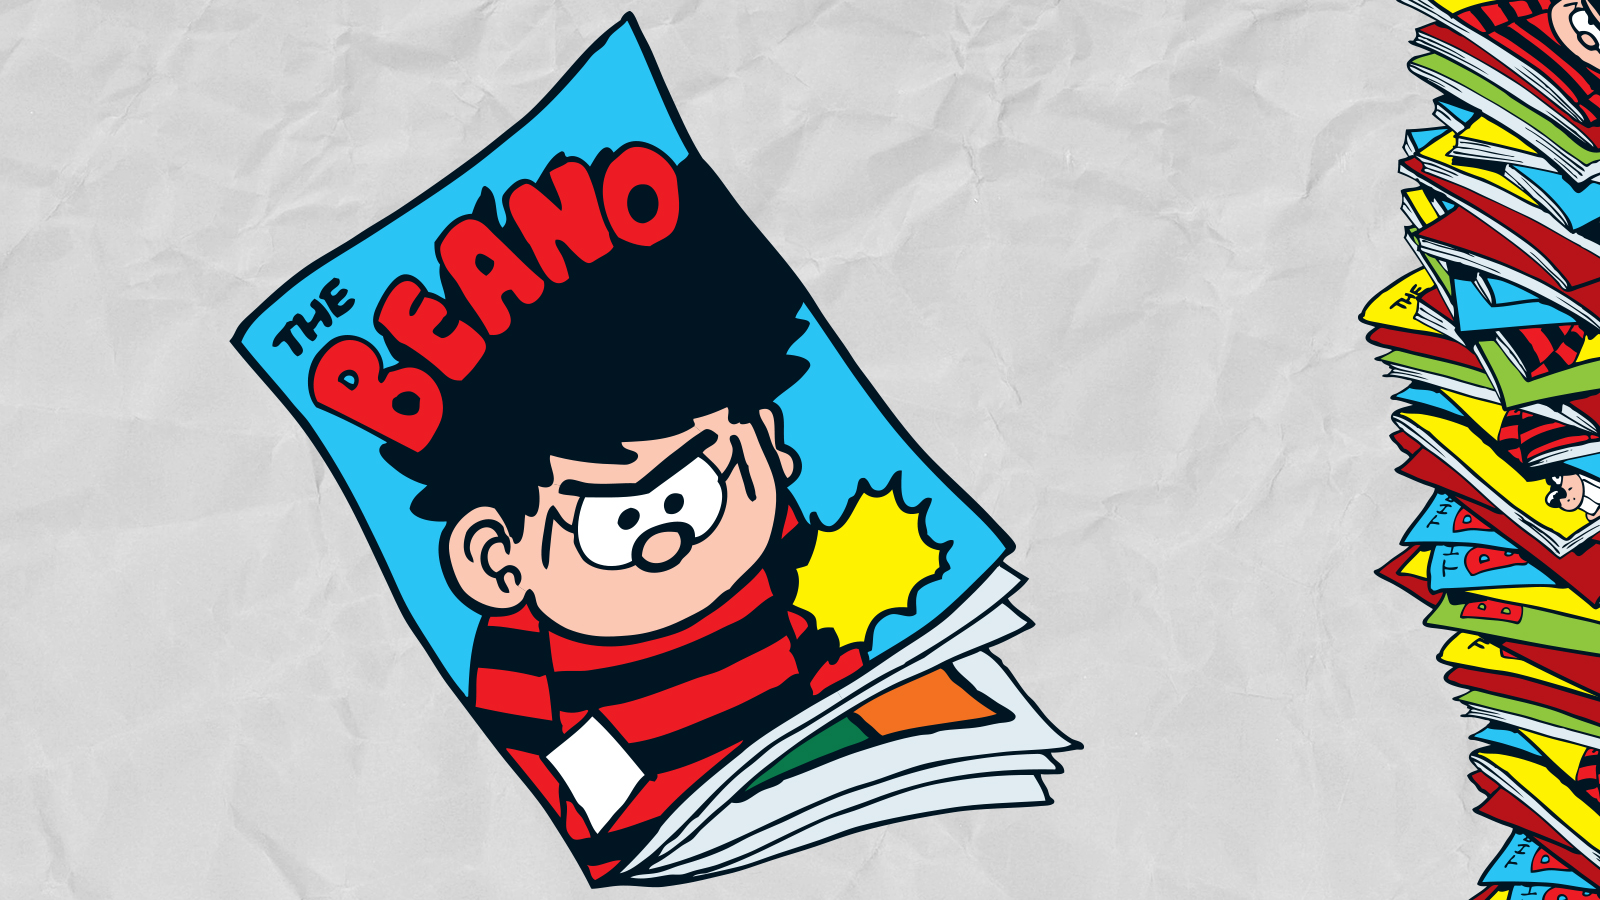 A stack of Beano's?